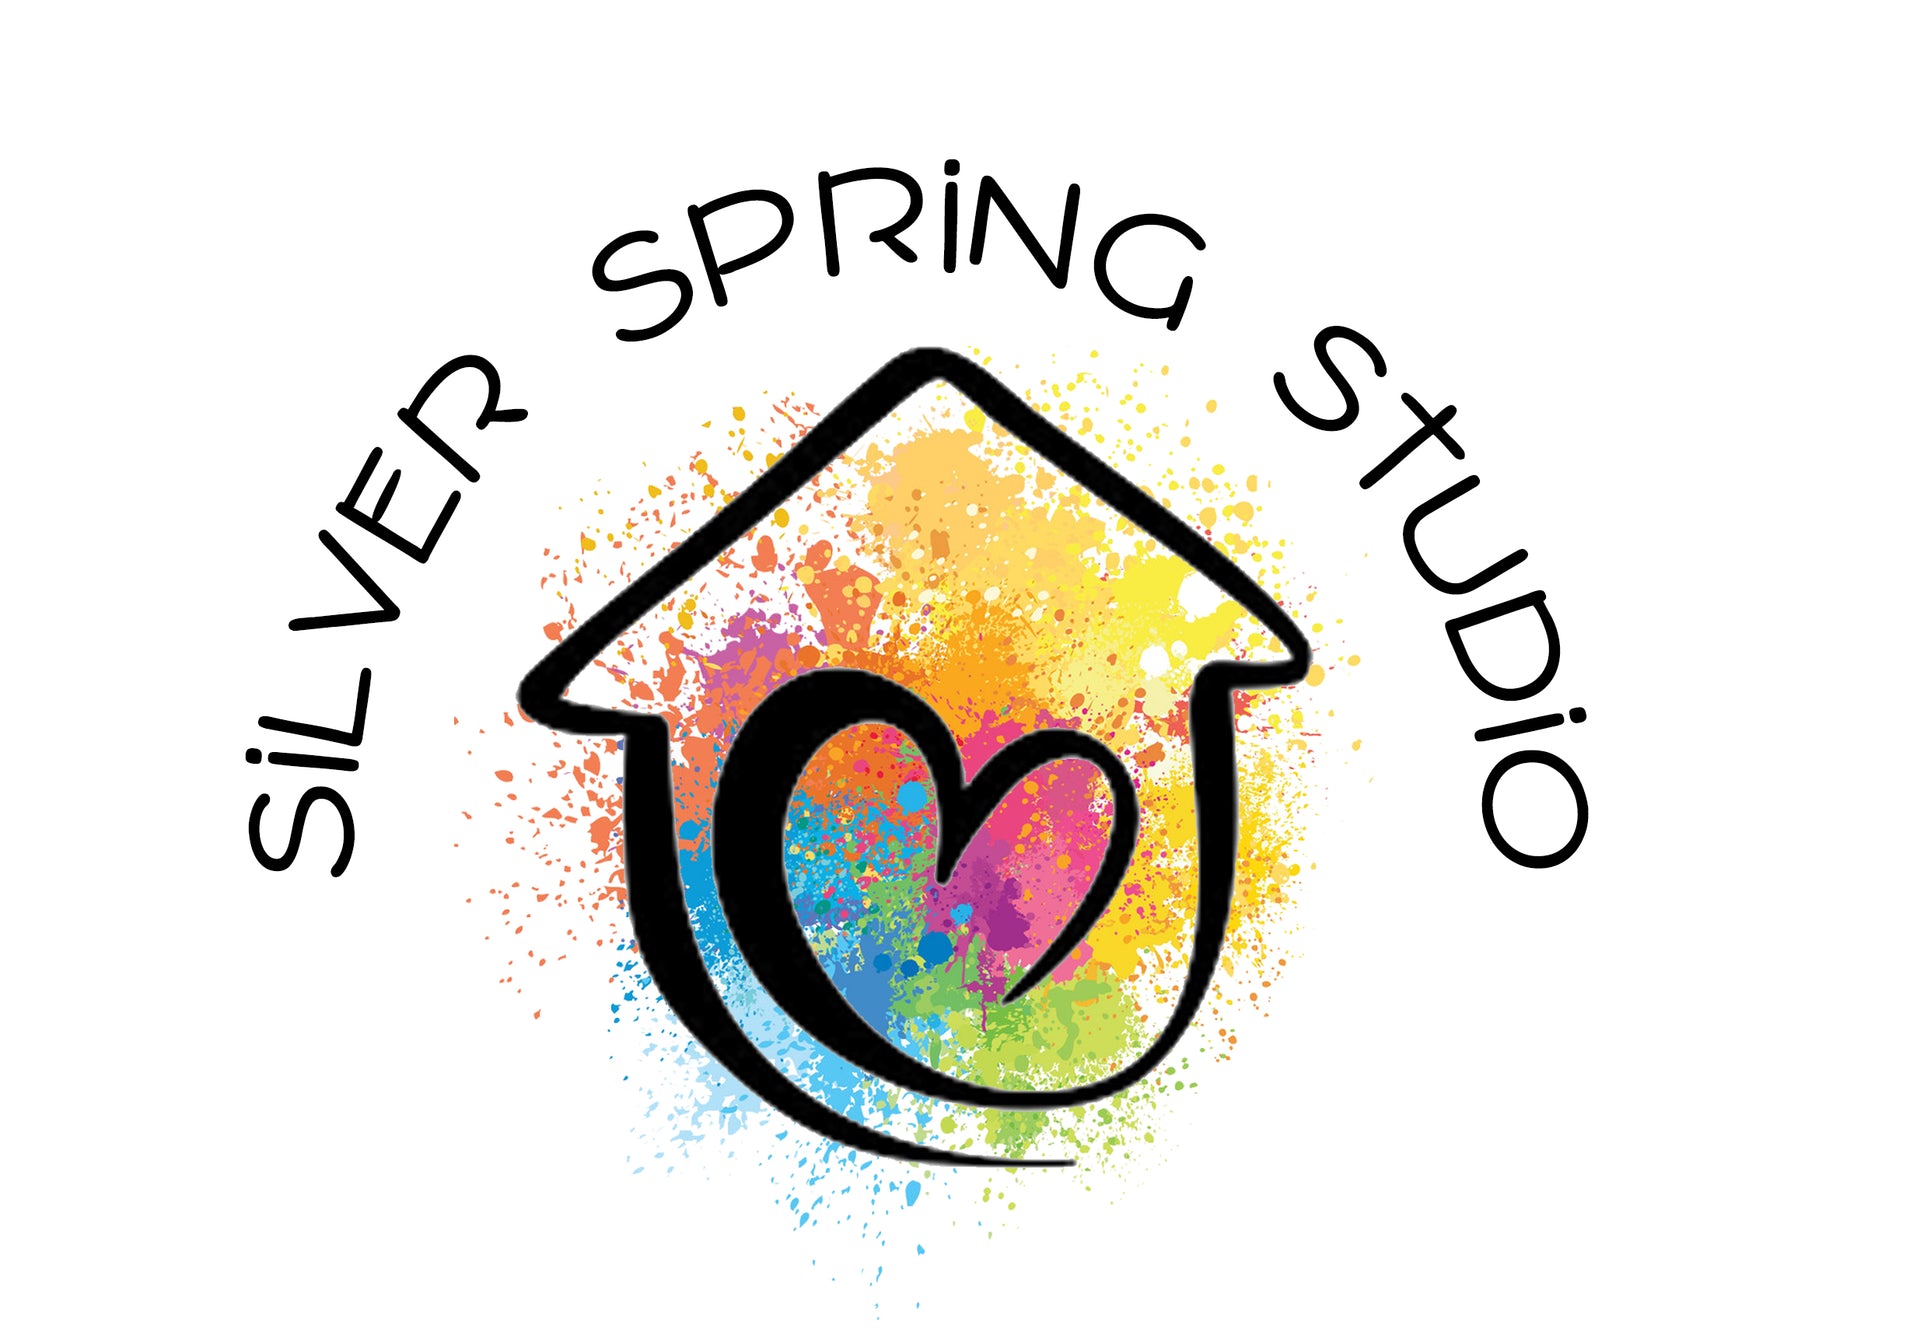 Load video: Silver Spring Art Studio Commercial